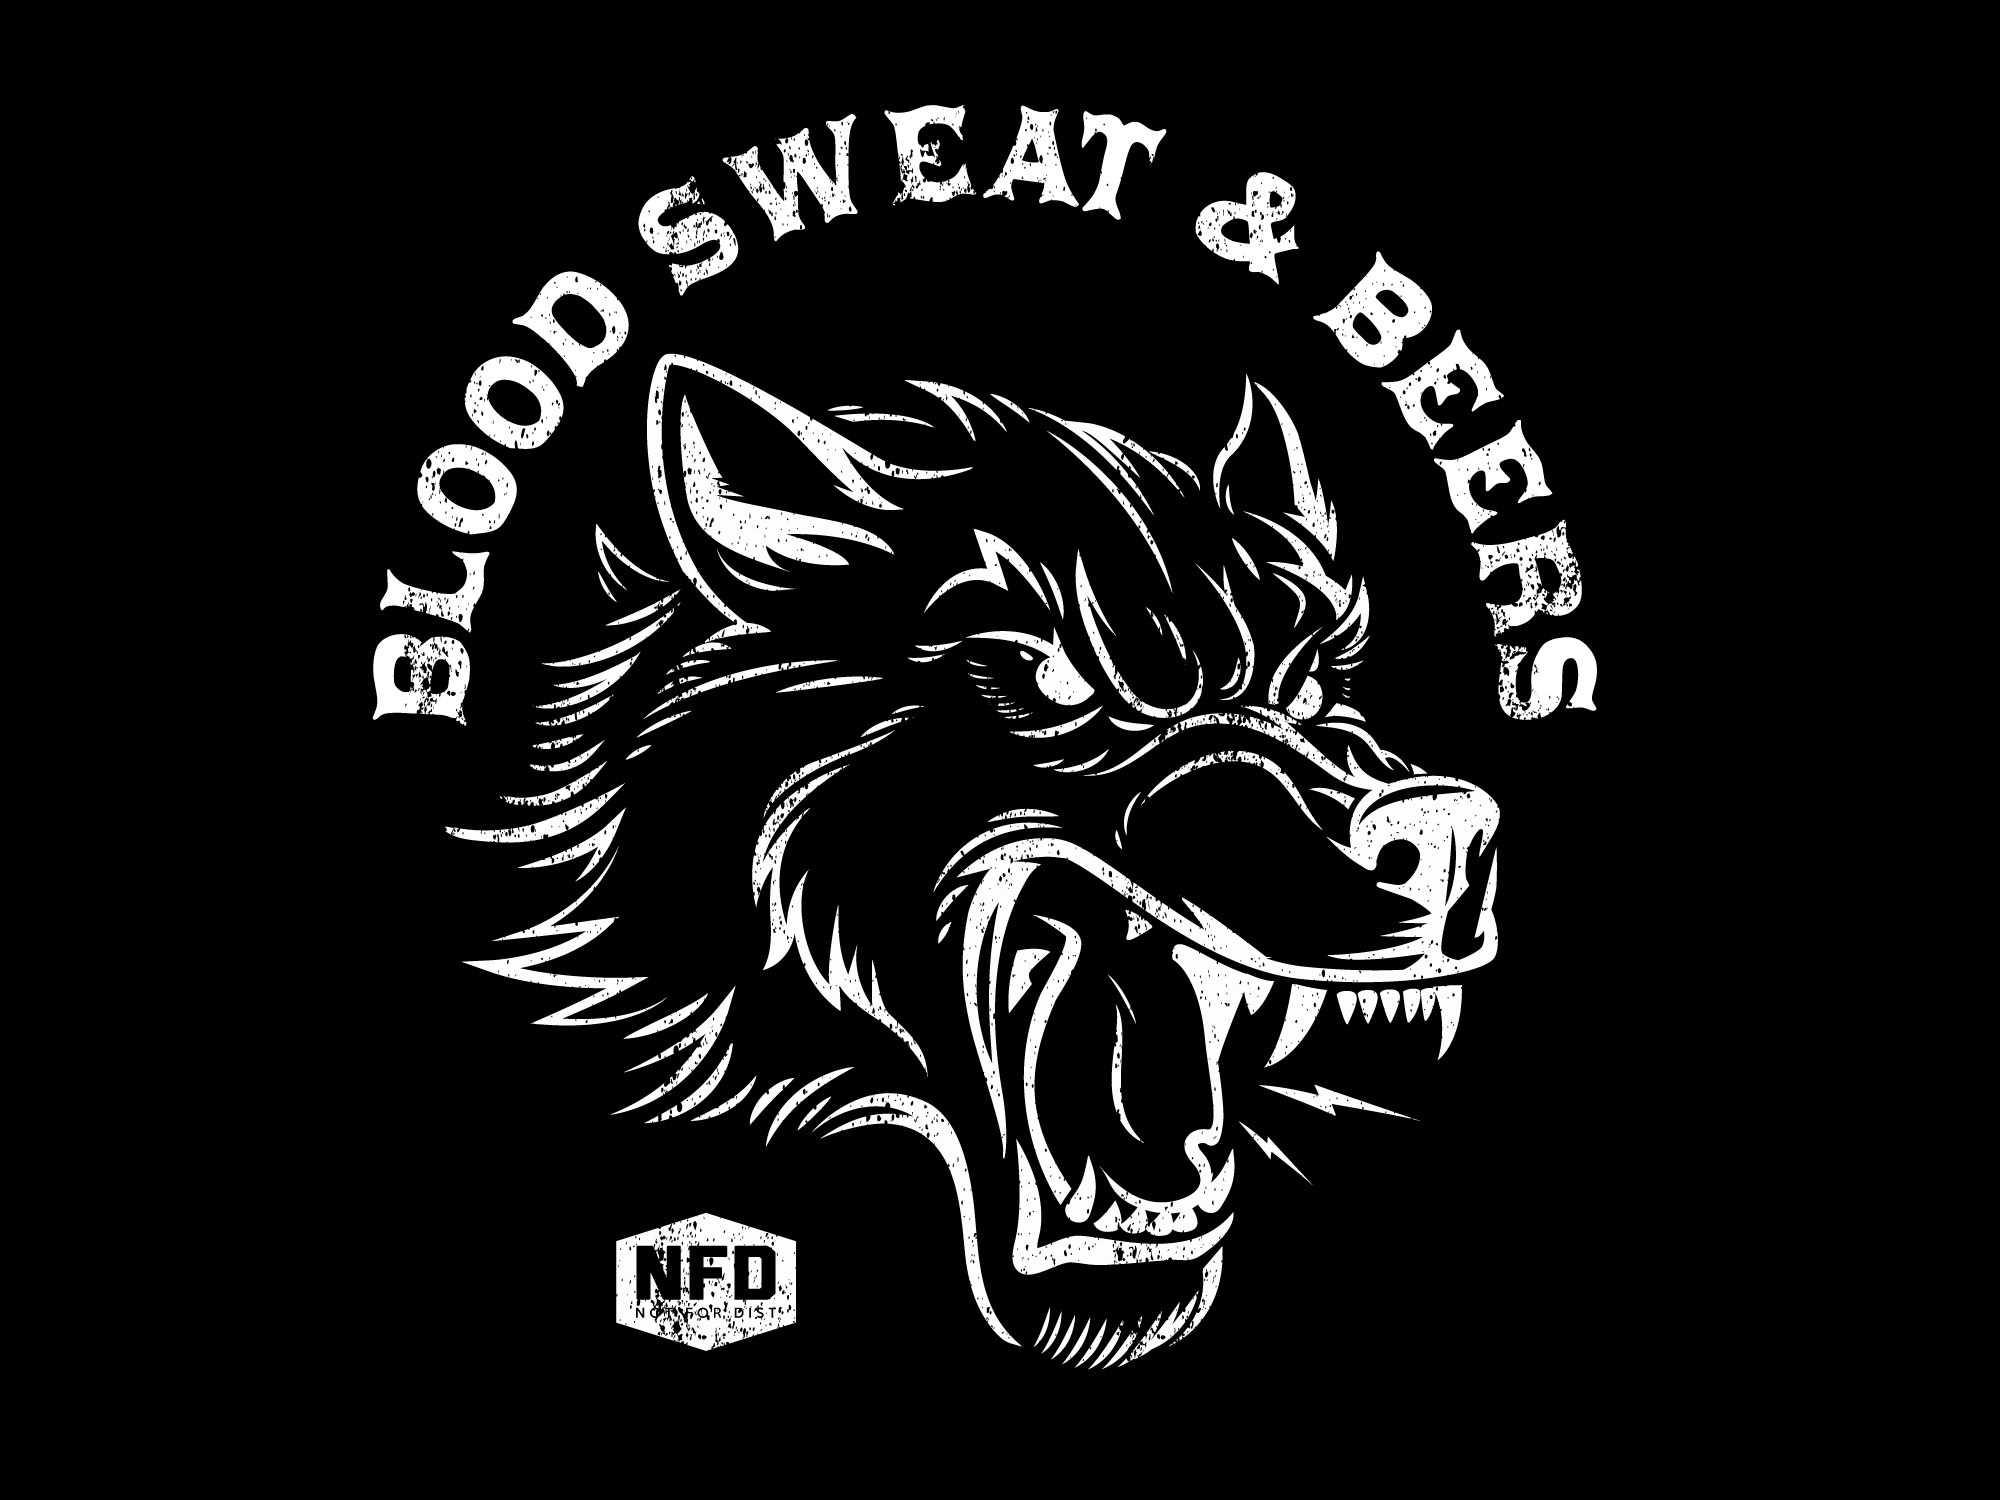 Blood-Sweat-and-beer